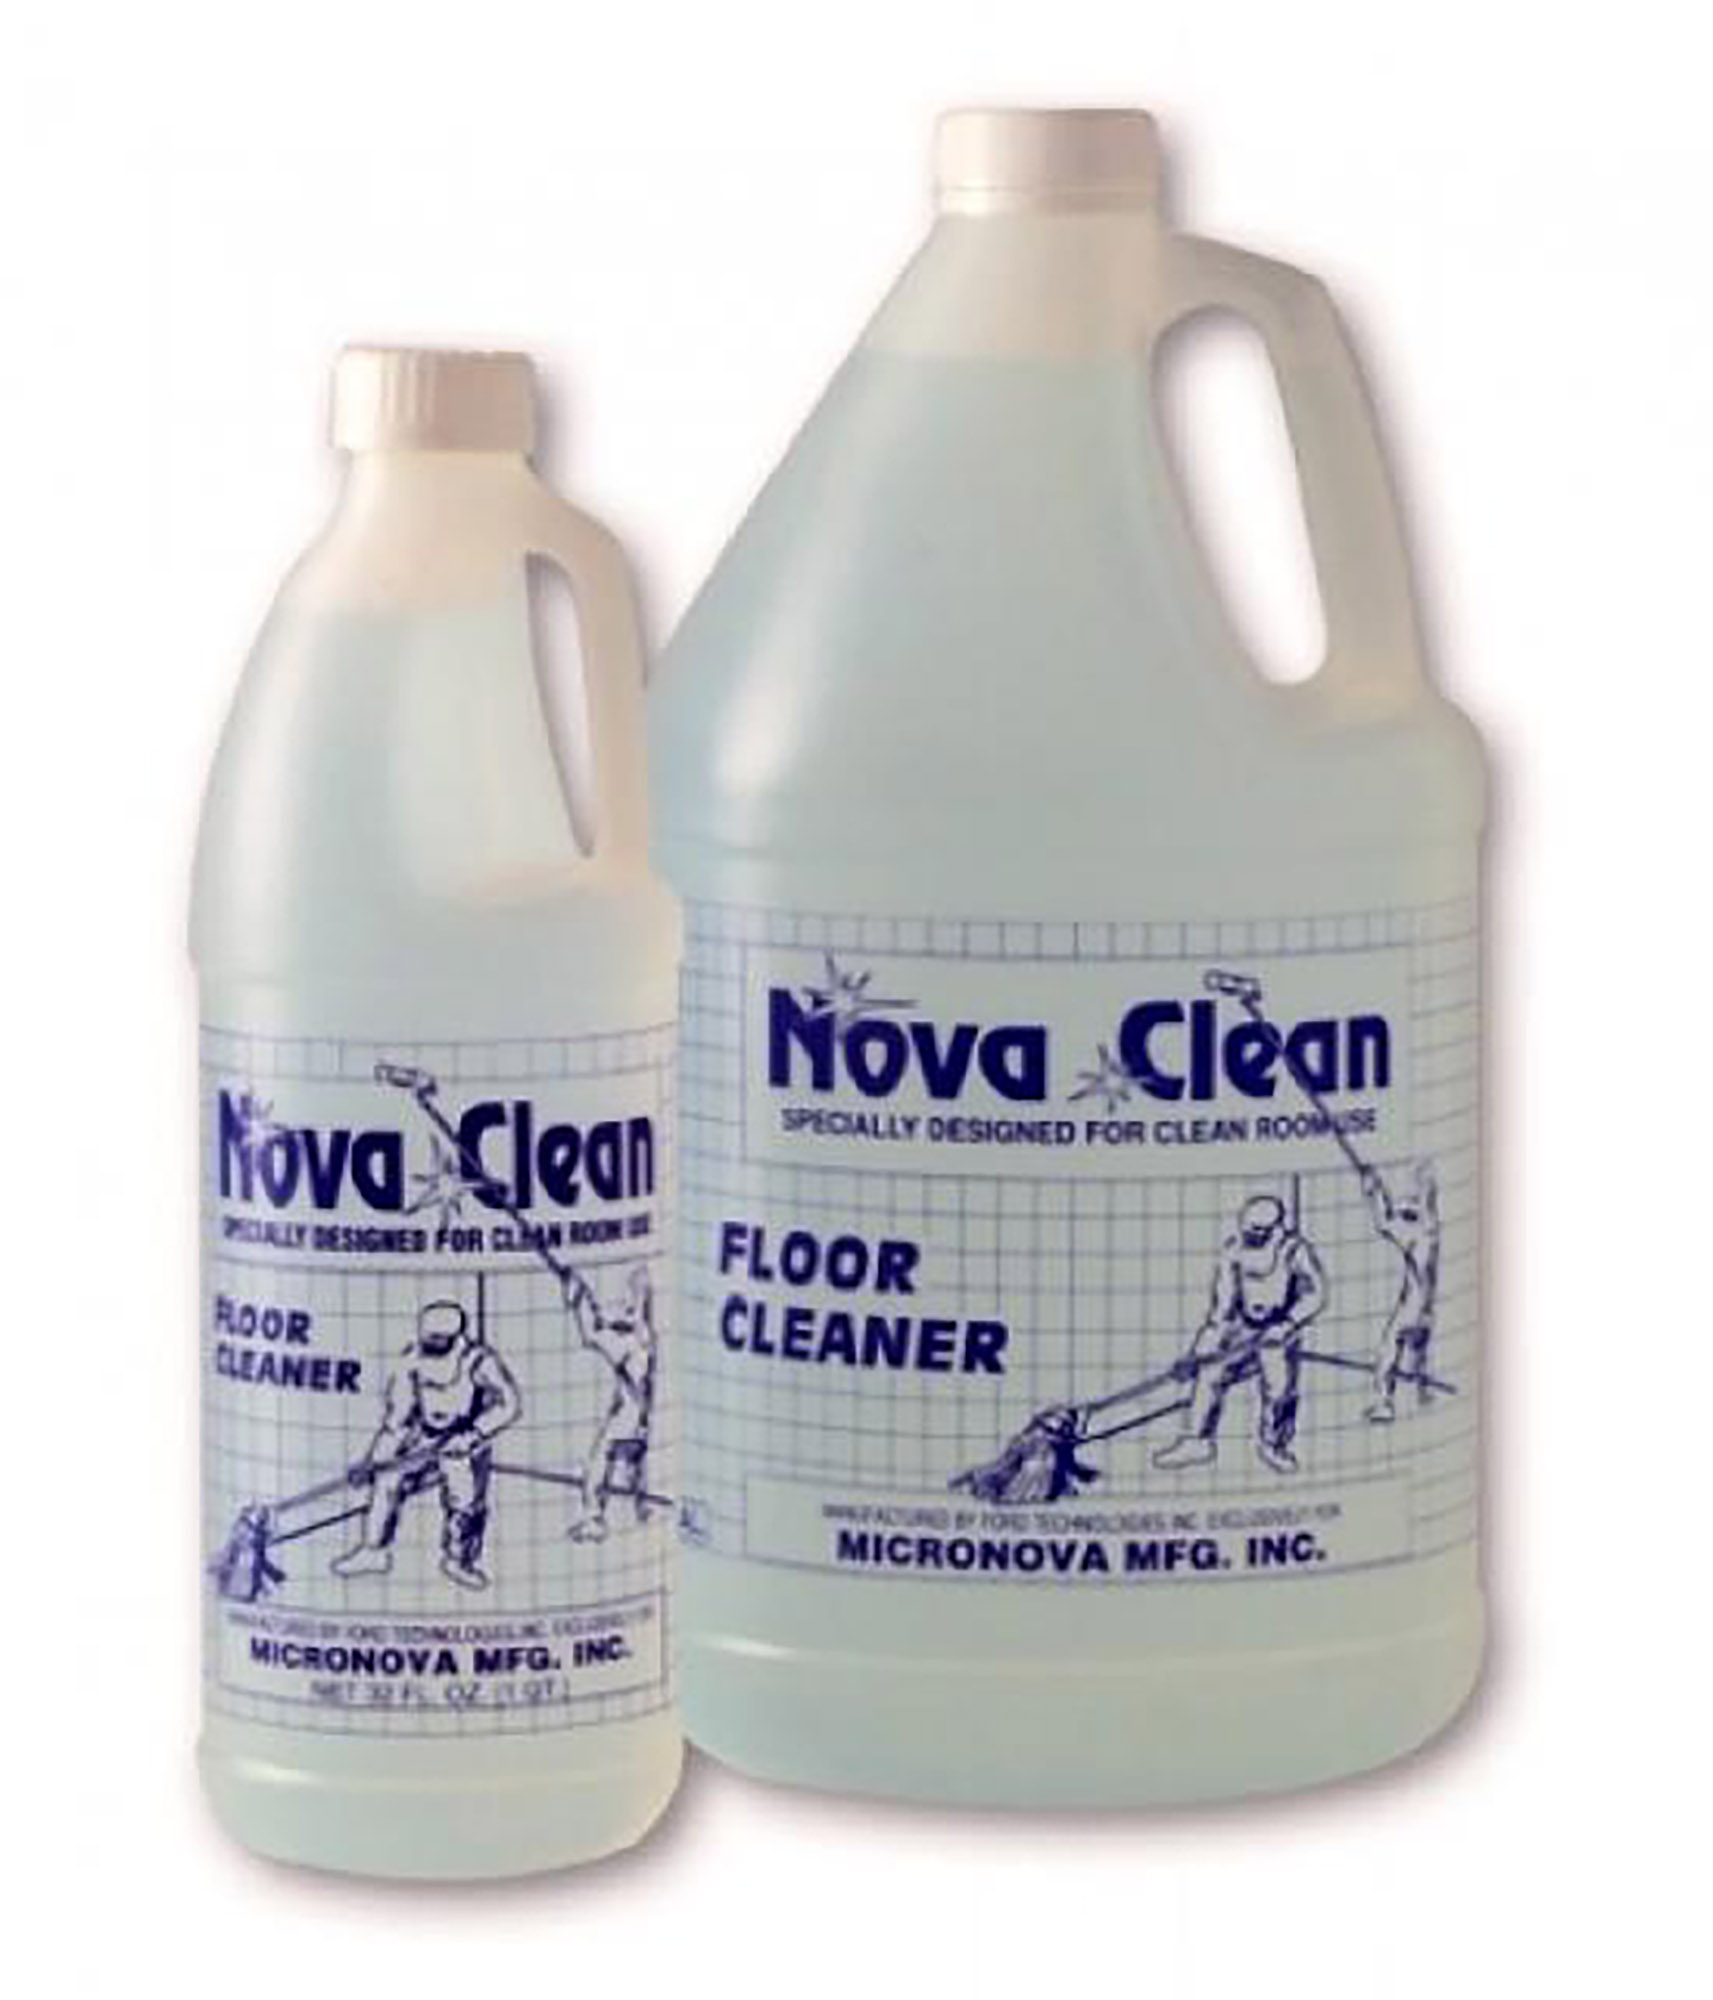 Nova cleaning. H-35 Cleaning solution. Sutter Hi Cleaning solutions.